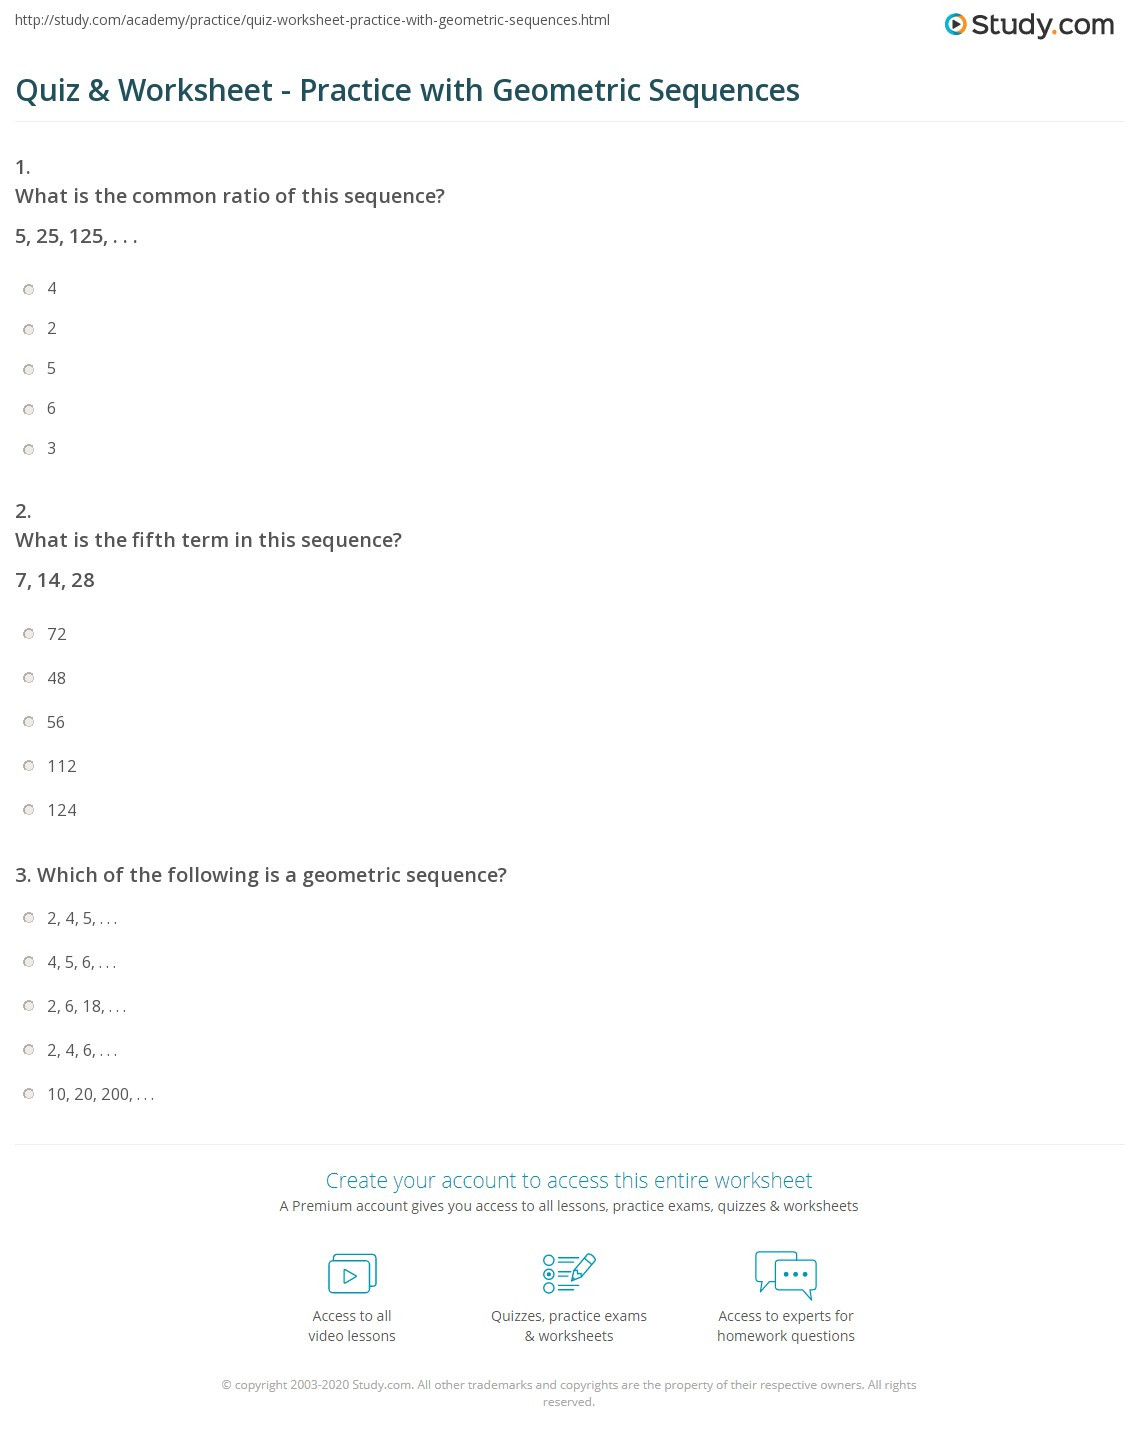 Geometric Sequences Worksheet Answers Quiz &amp; Worksheet Practice with Geometric Sequences